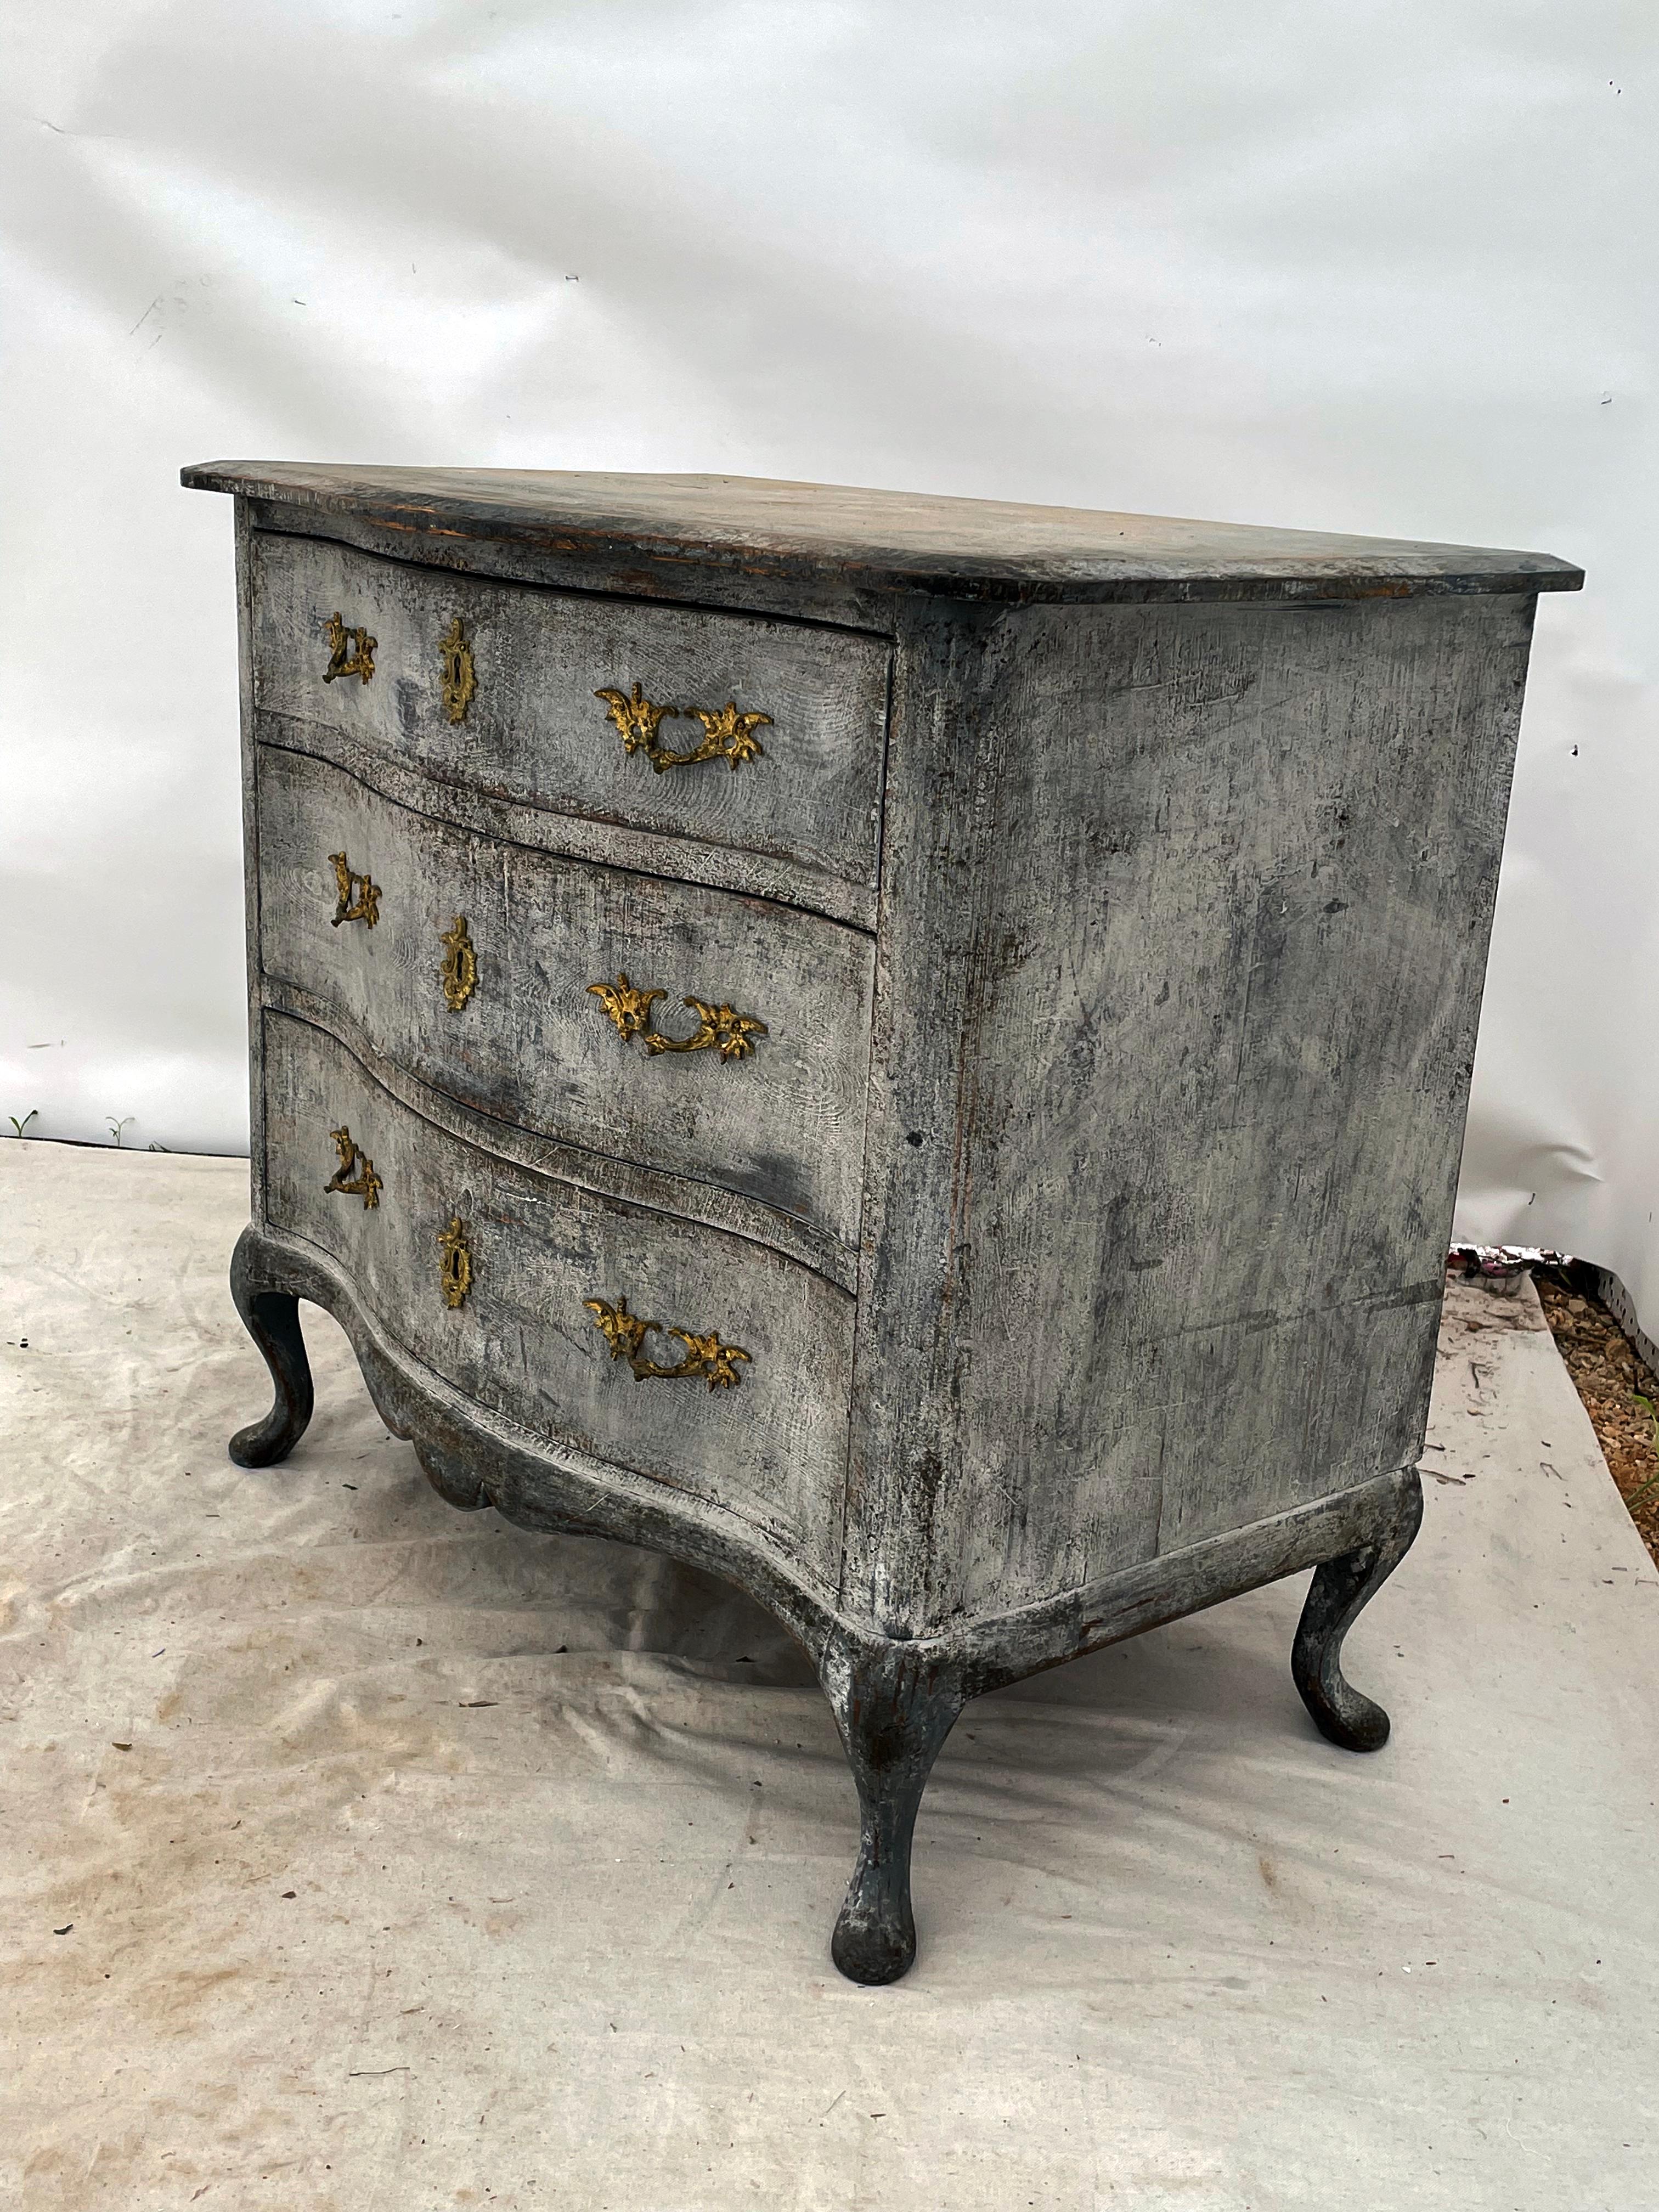 A beautiful late 18th century Swedish commode from the Rococo period with original brass hardware and locks. This commode has a serpentine front, shaped top and apron to the front and sides, and is raised on cabriole legs. The Swedes refined the